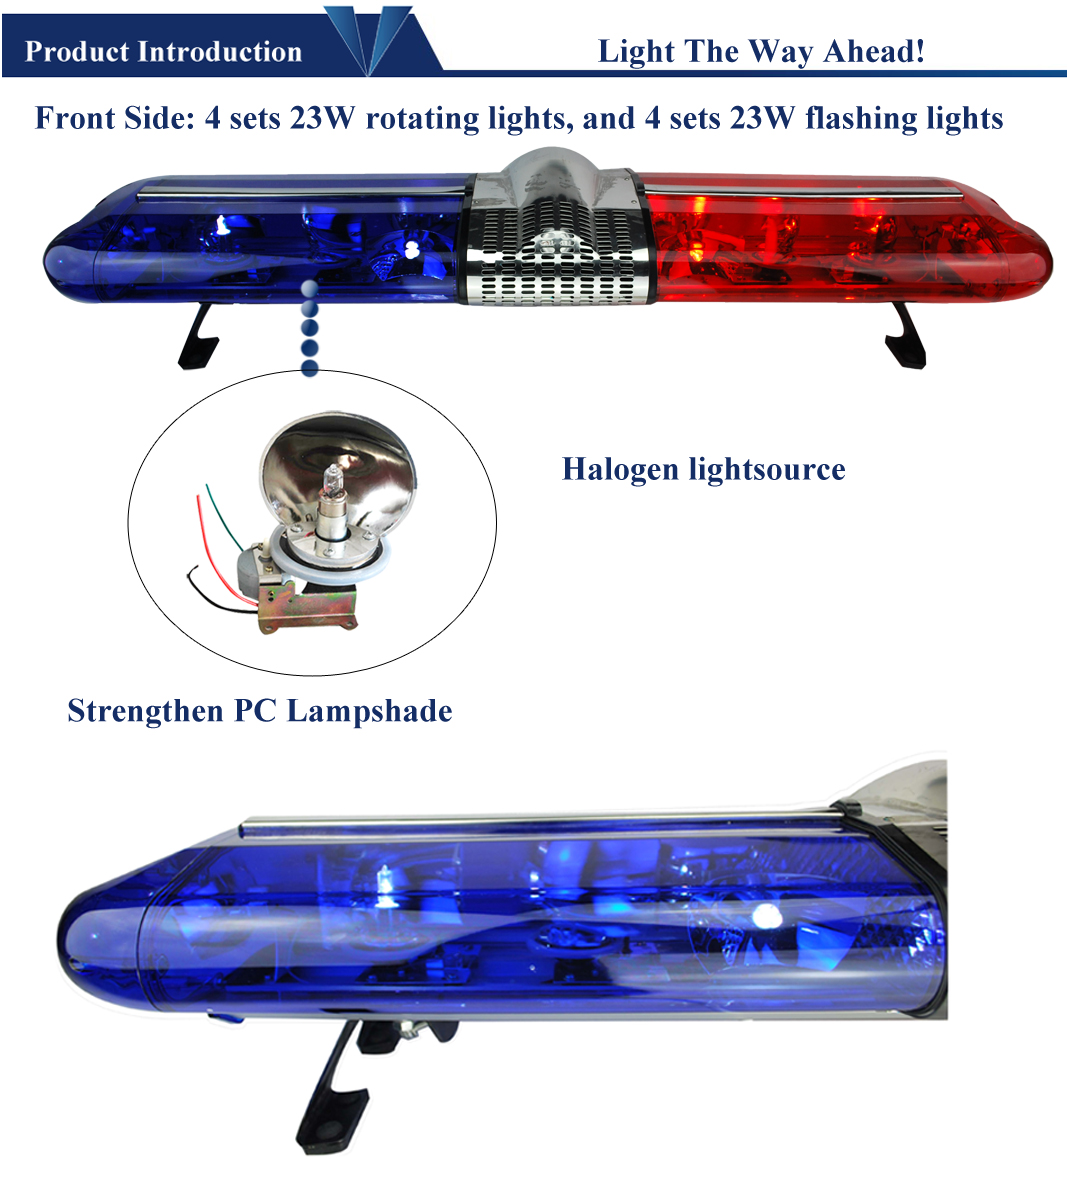 PC material chome plated halogen lamp lightbar